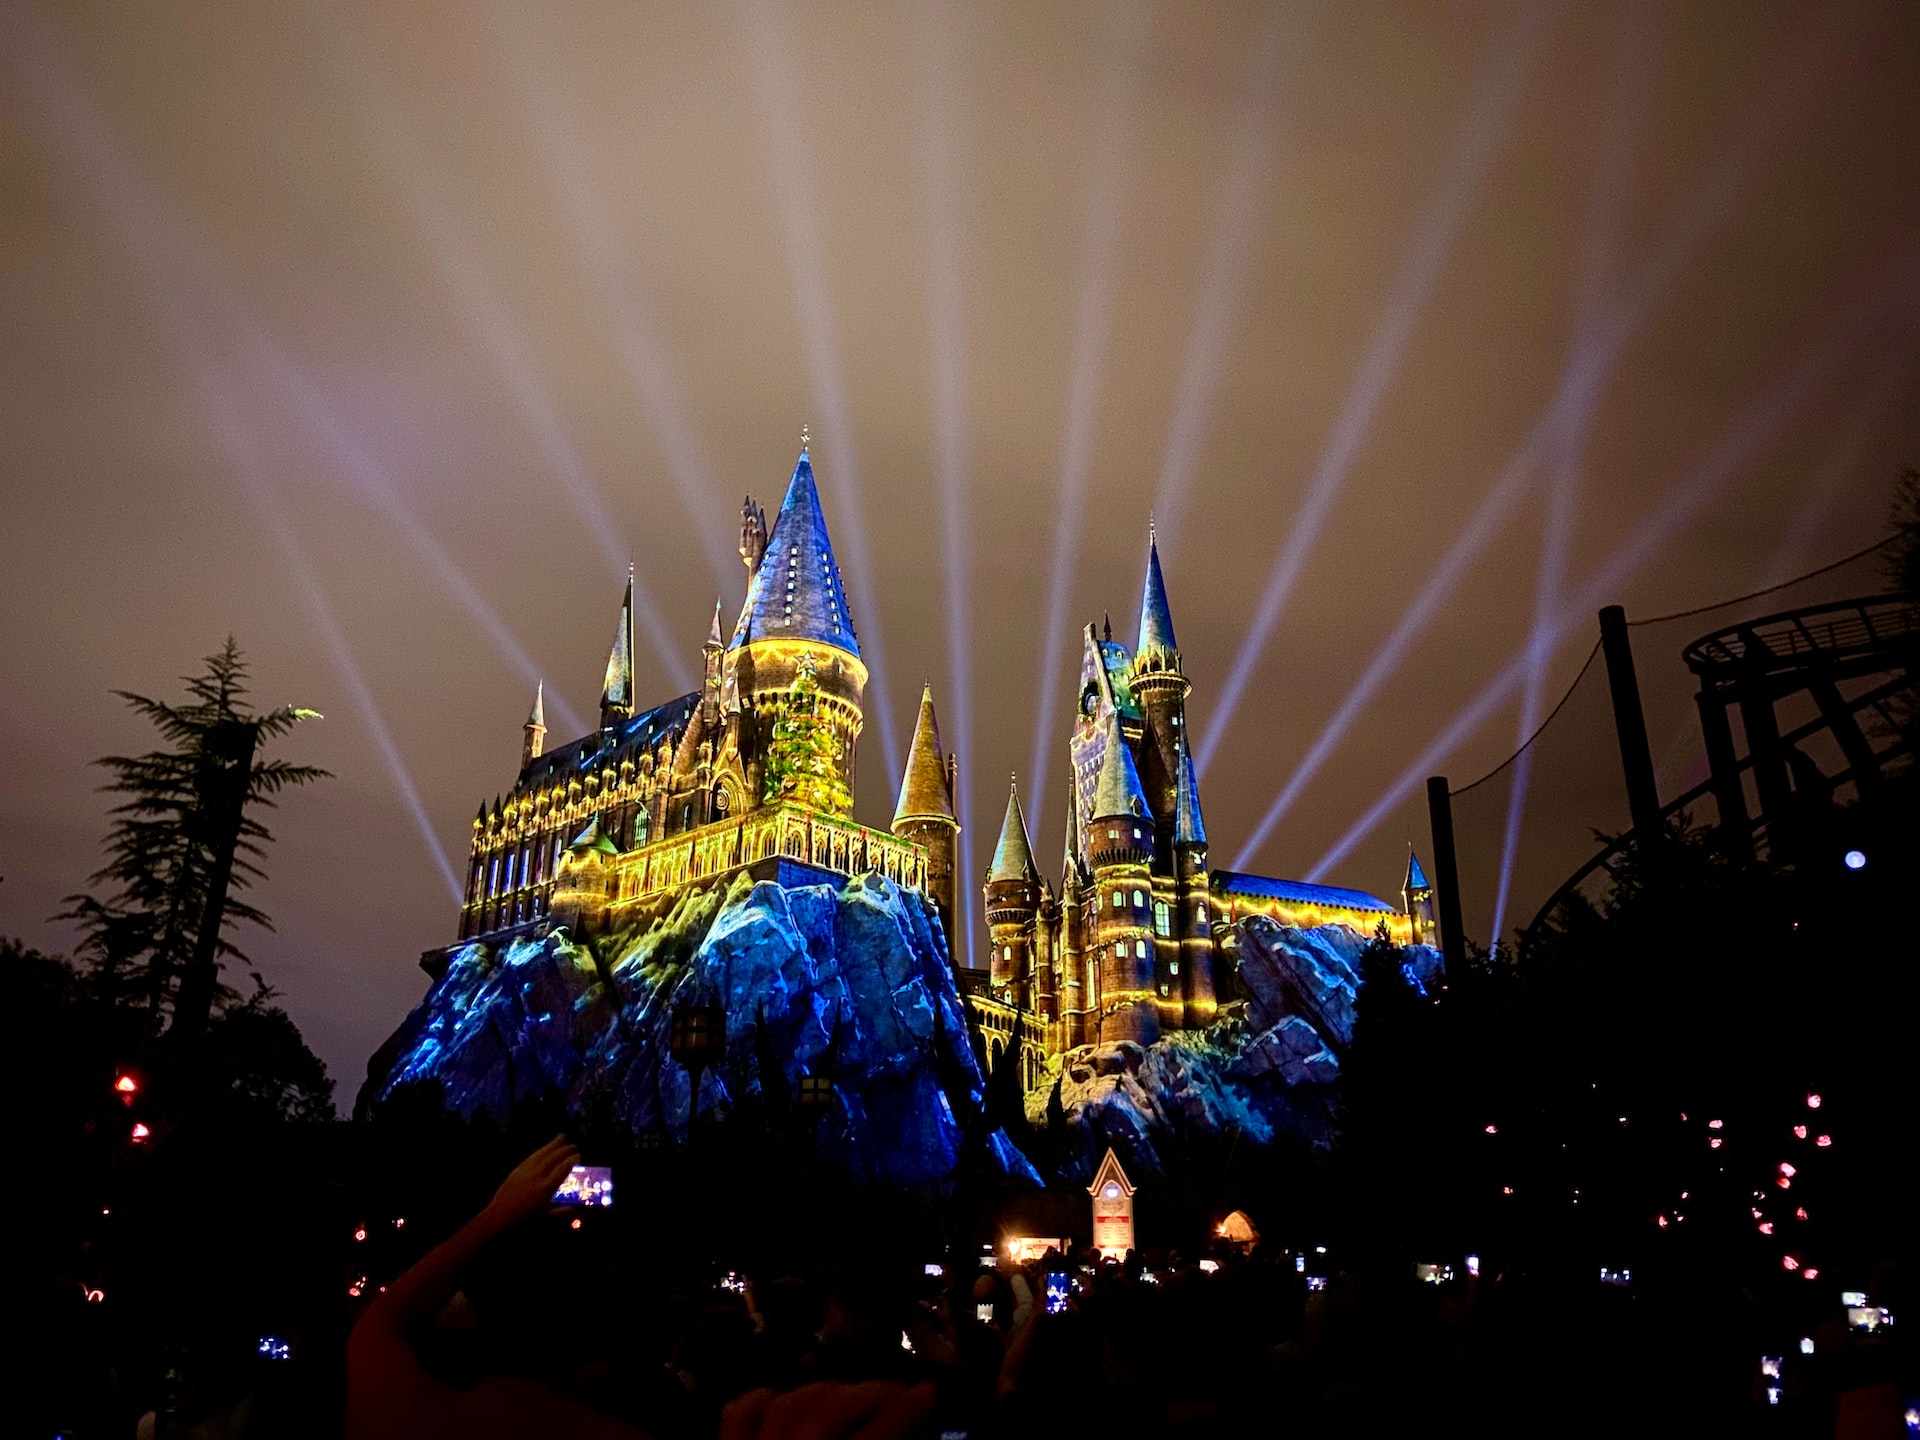 A Hogwarts light show, making this another solid choice for a place to go for Thanksgiving.